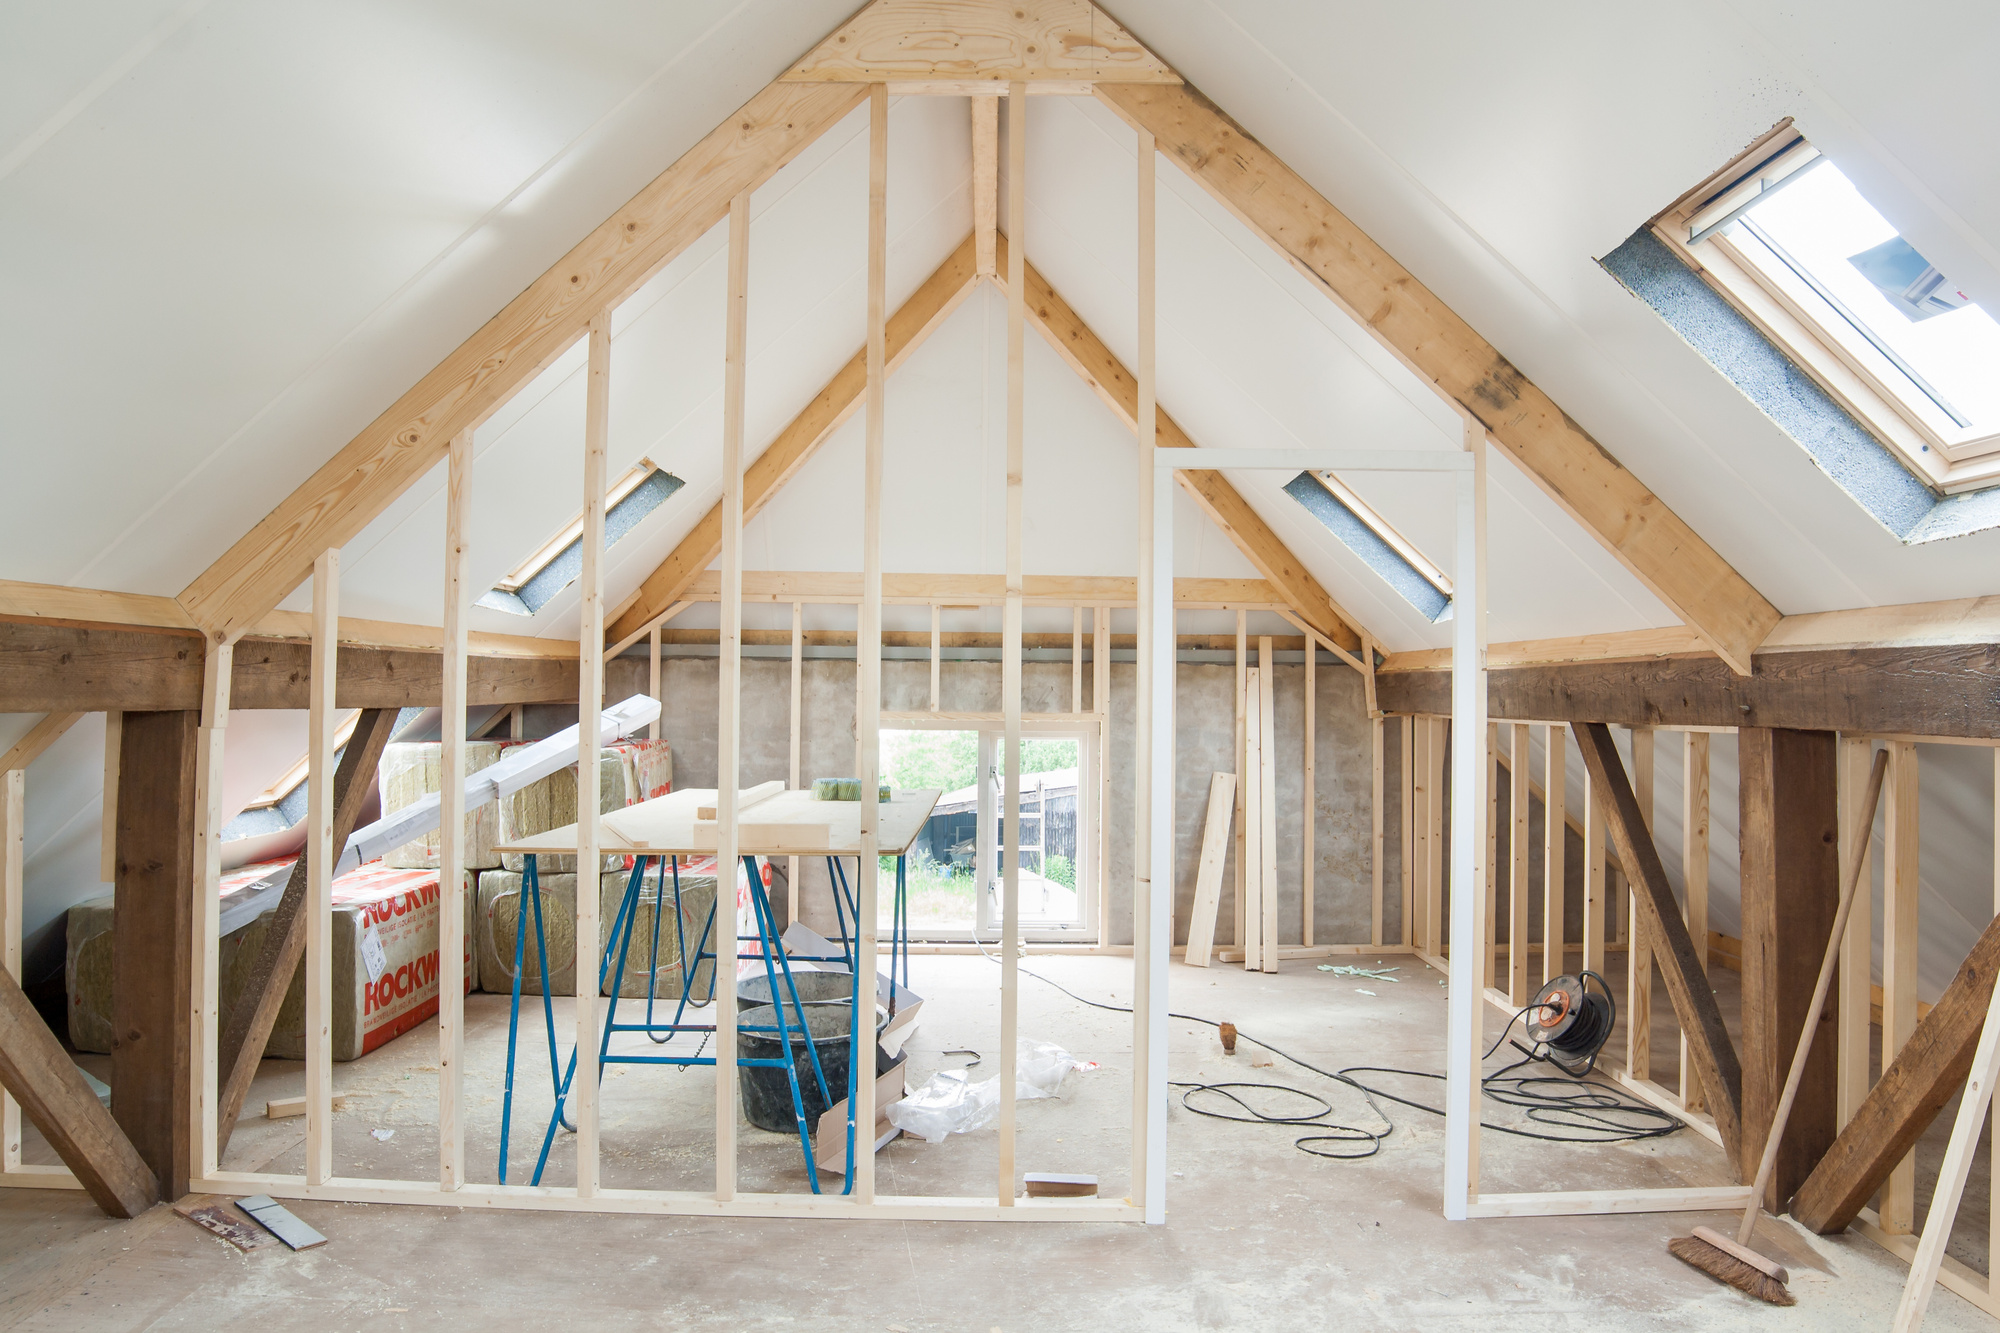 Did you just buy a fixer-upper or want to transform the home you've had for years? Get inspired by these home remodeling ideas!